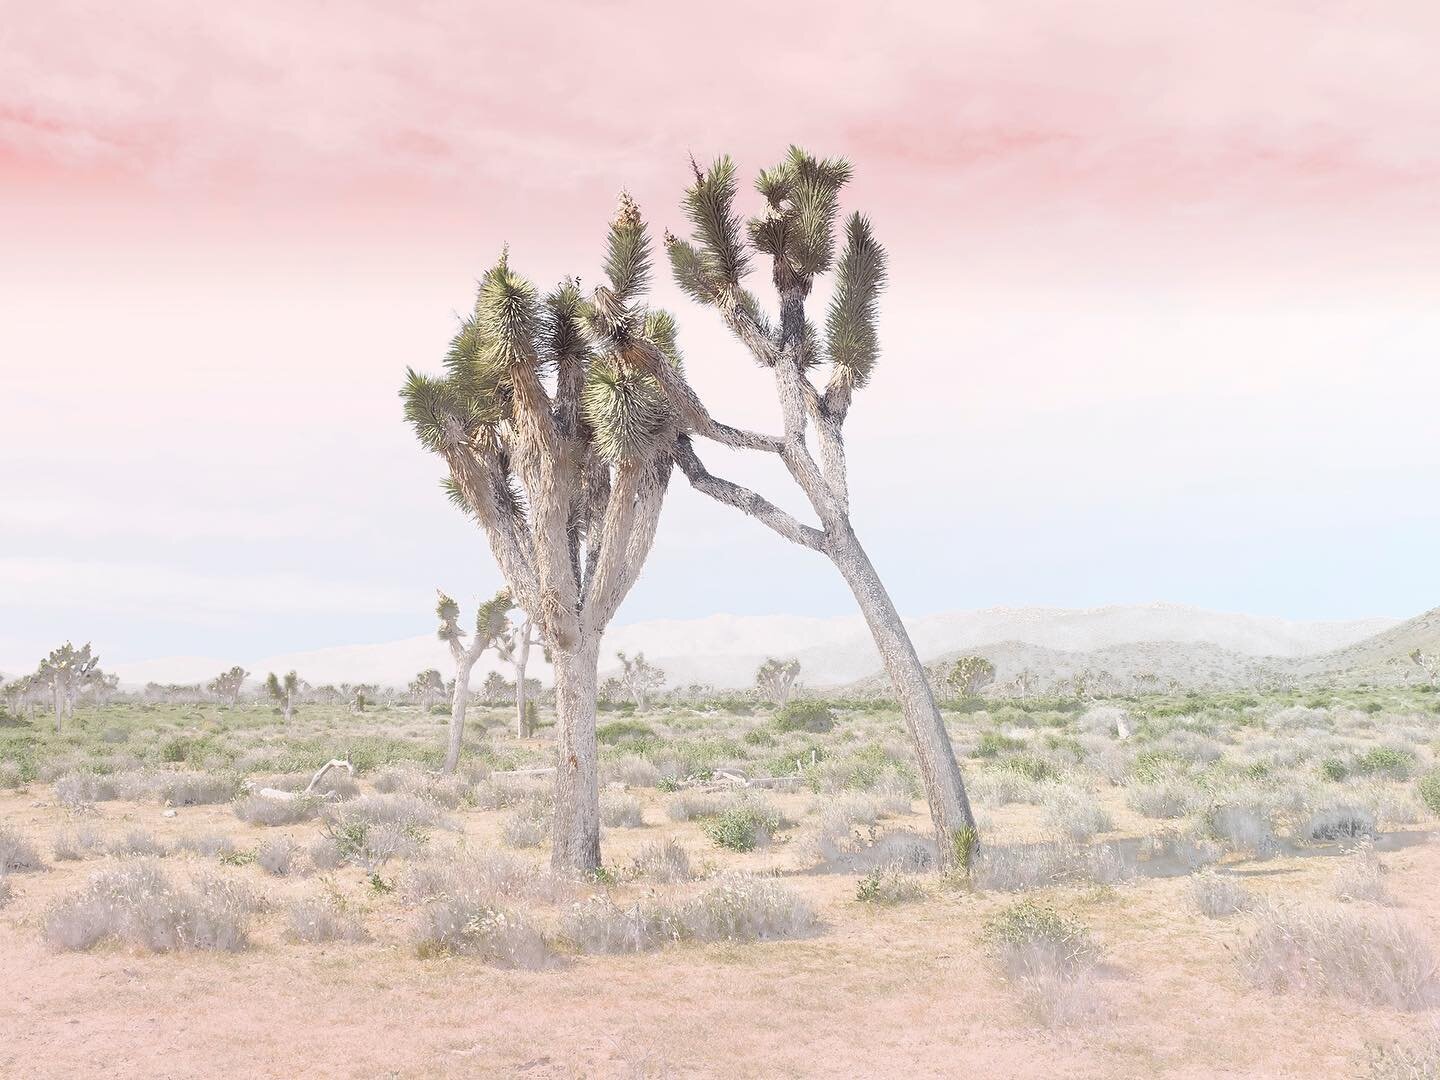 💓Spring Print Sale💓. Add unique prints to your space while the sale is on.  Save 20% off your entire order of framed and unframed prints in bio. ⁠⁠
⁠⁠
Pictured here: Joshua Tree No. 21⁠⁠